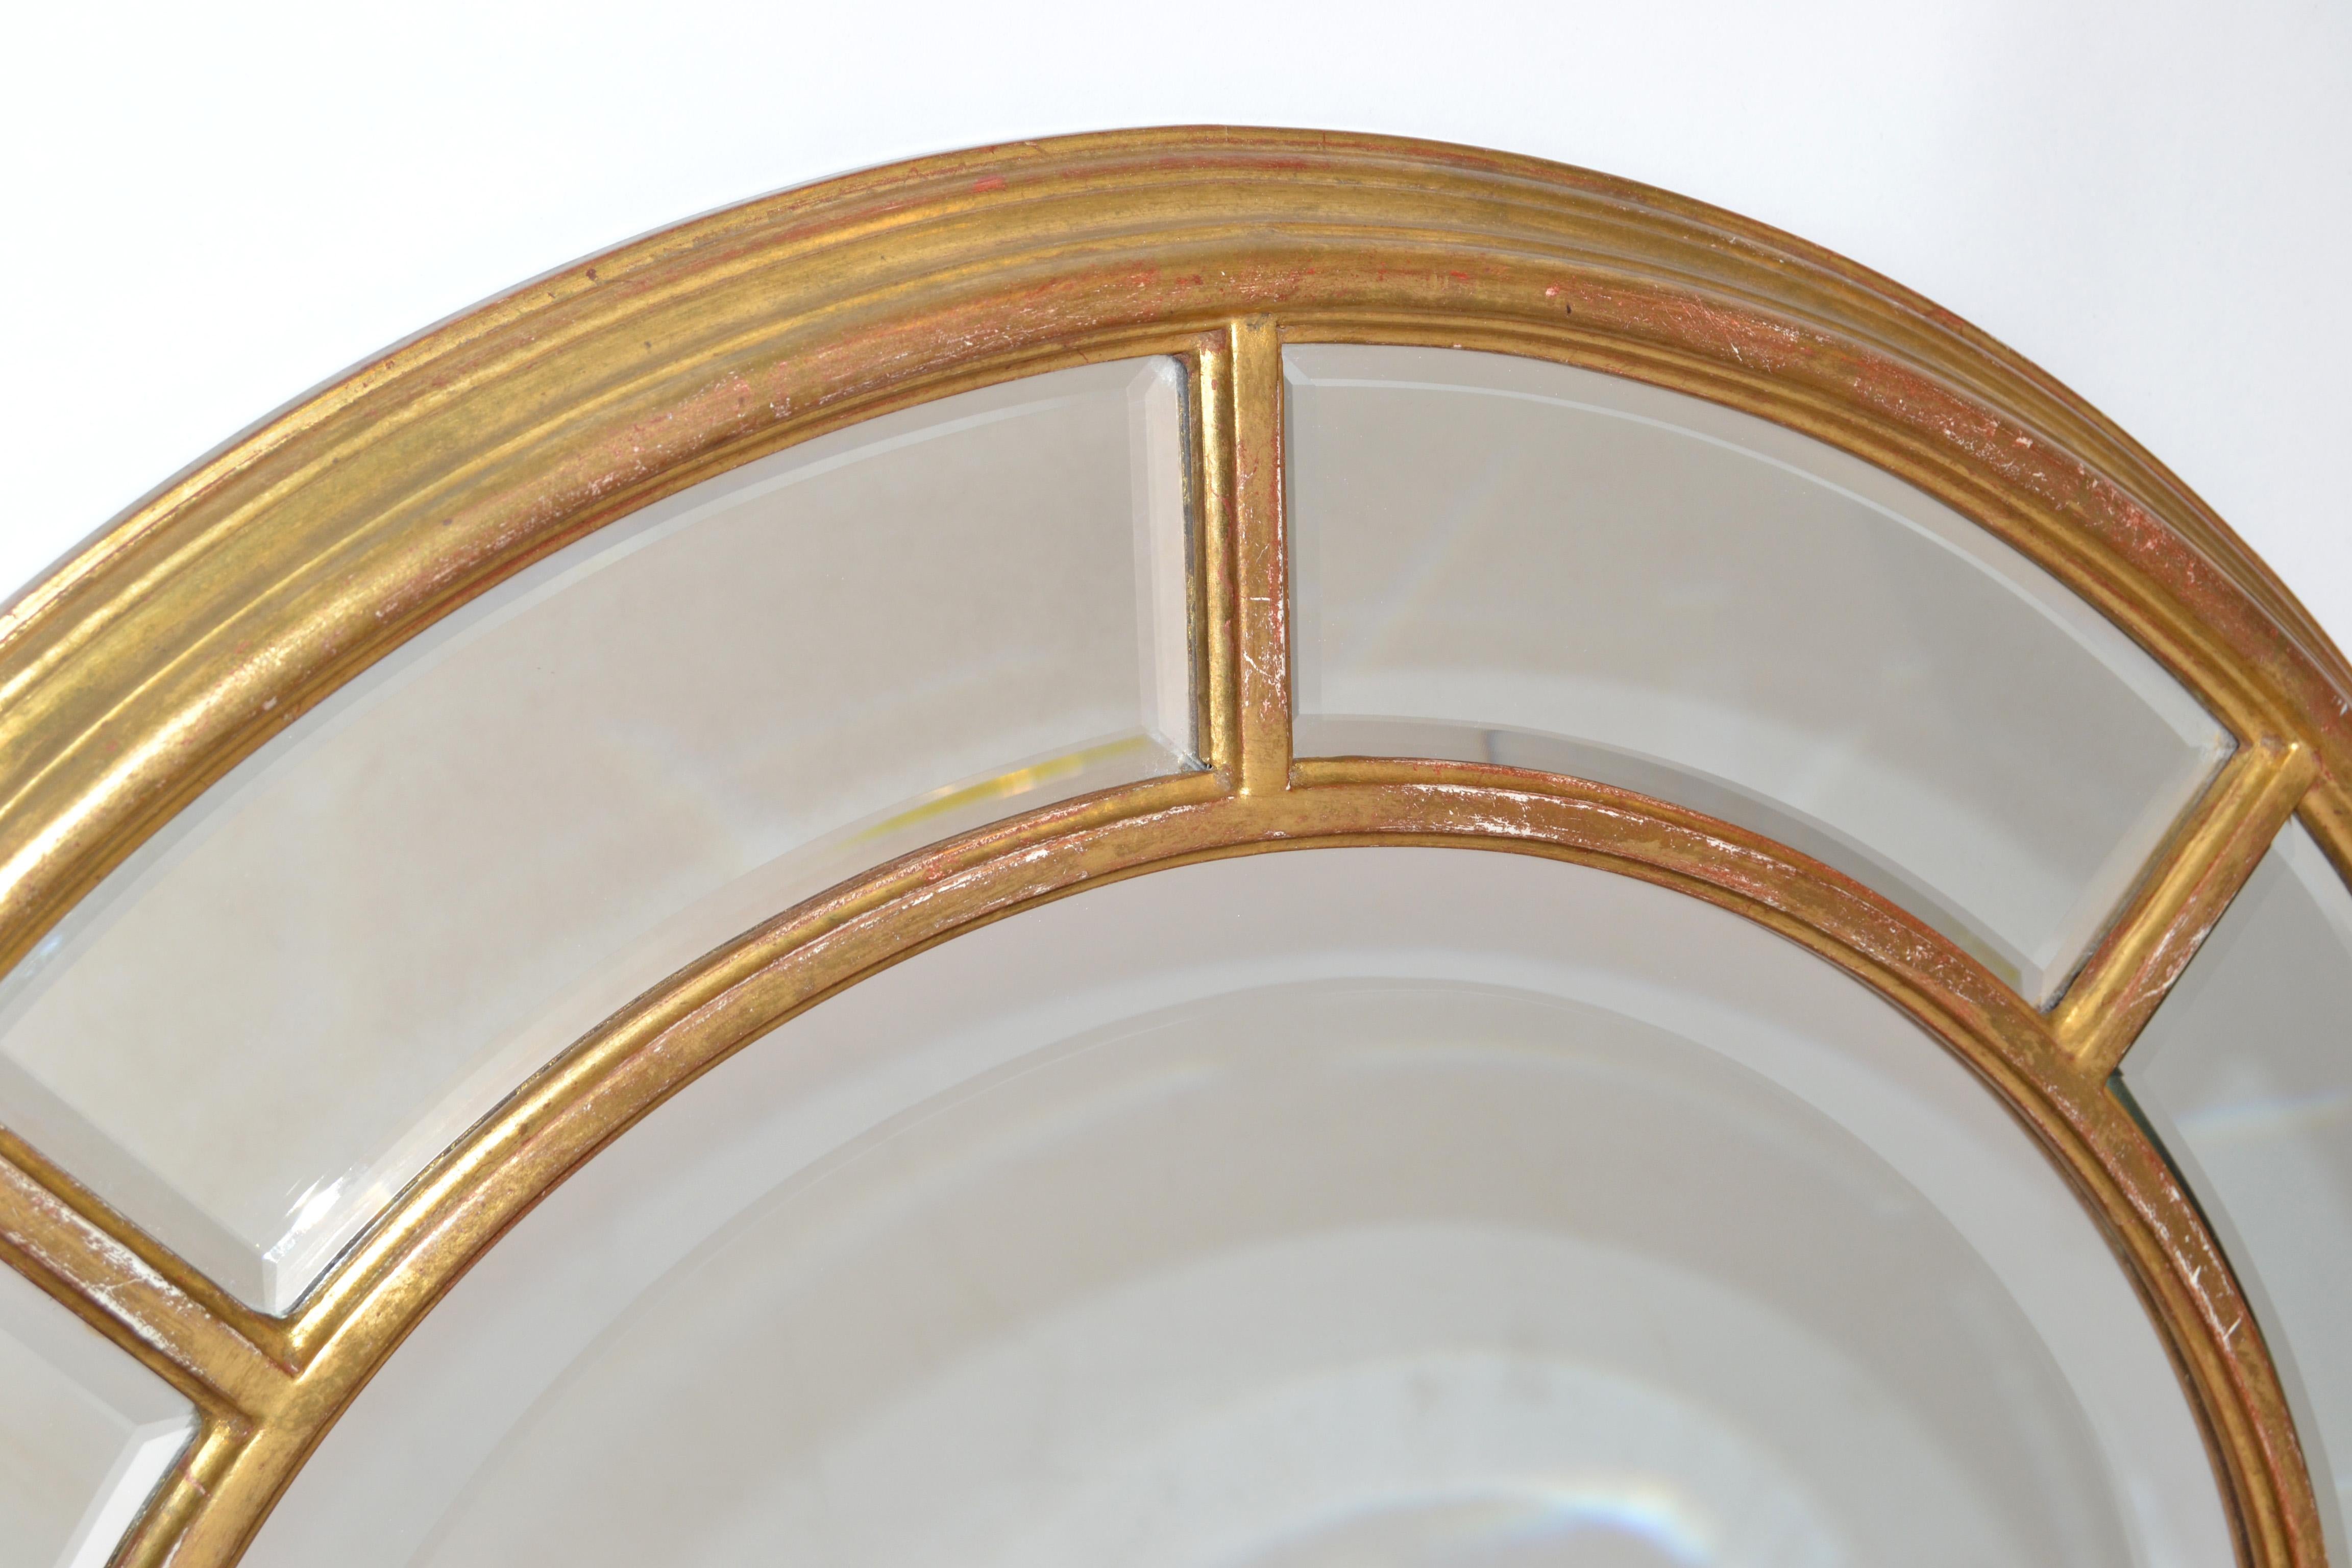 1970s Arch Shaped Italian Firenze Beveled Glass Wall Mirror with Gilt Wood Frame For Sale 2